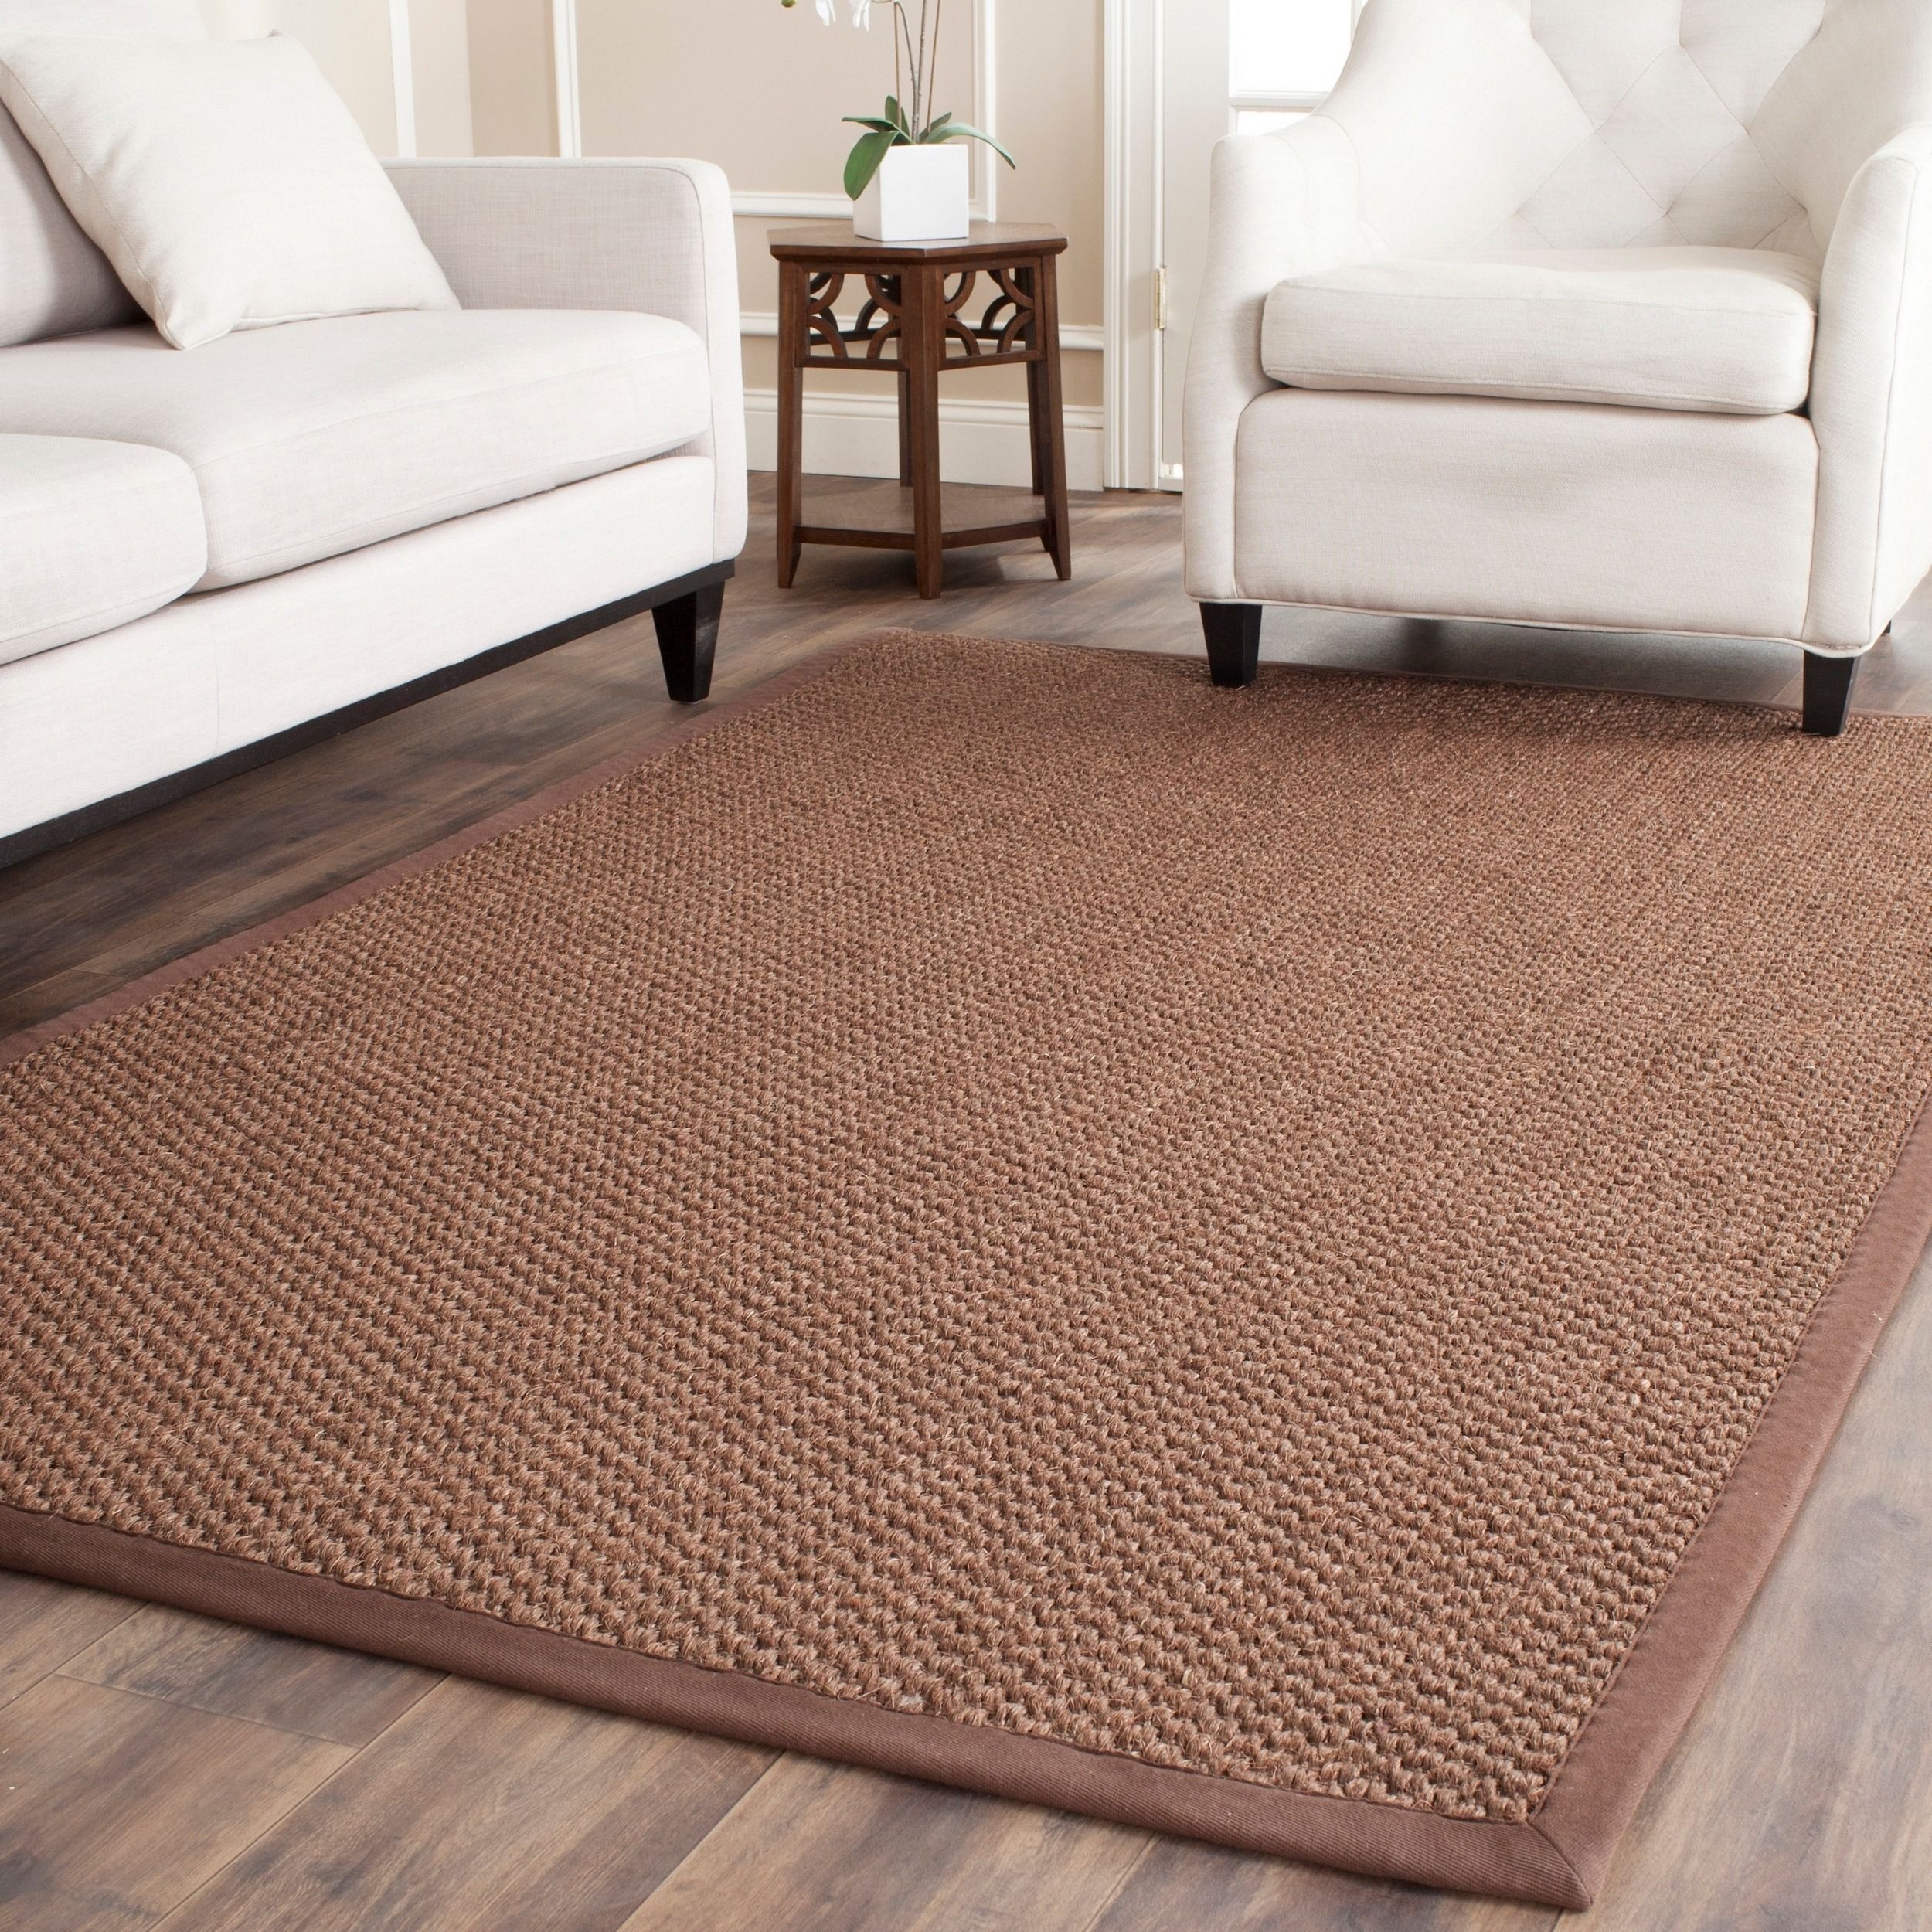 10 Benefits of Using Sisal Rugs In Your Homes